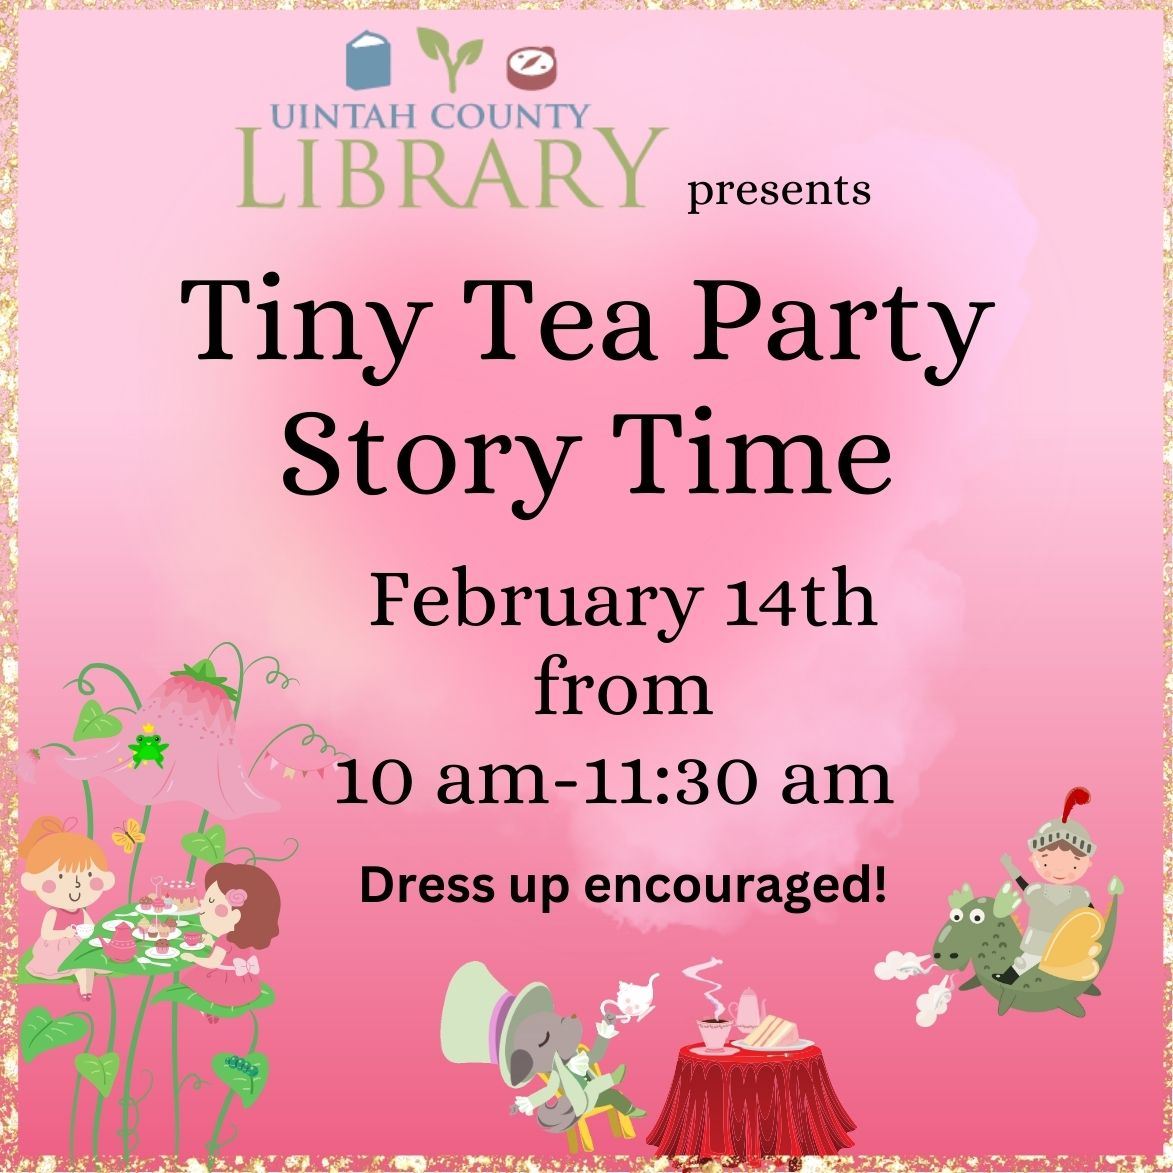 Tiny Tea Party Story Time 10 am. Dress up encouraged!